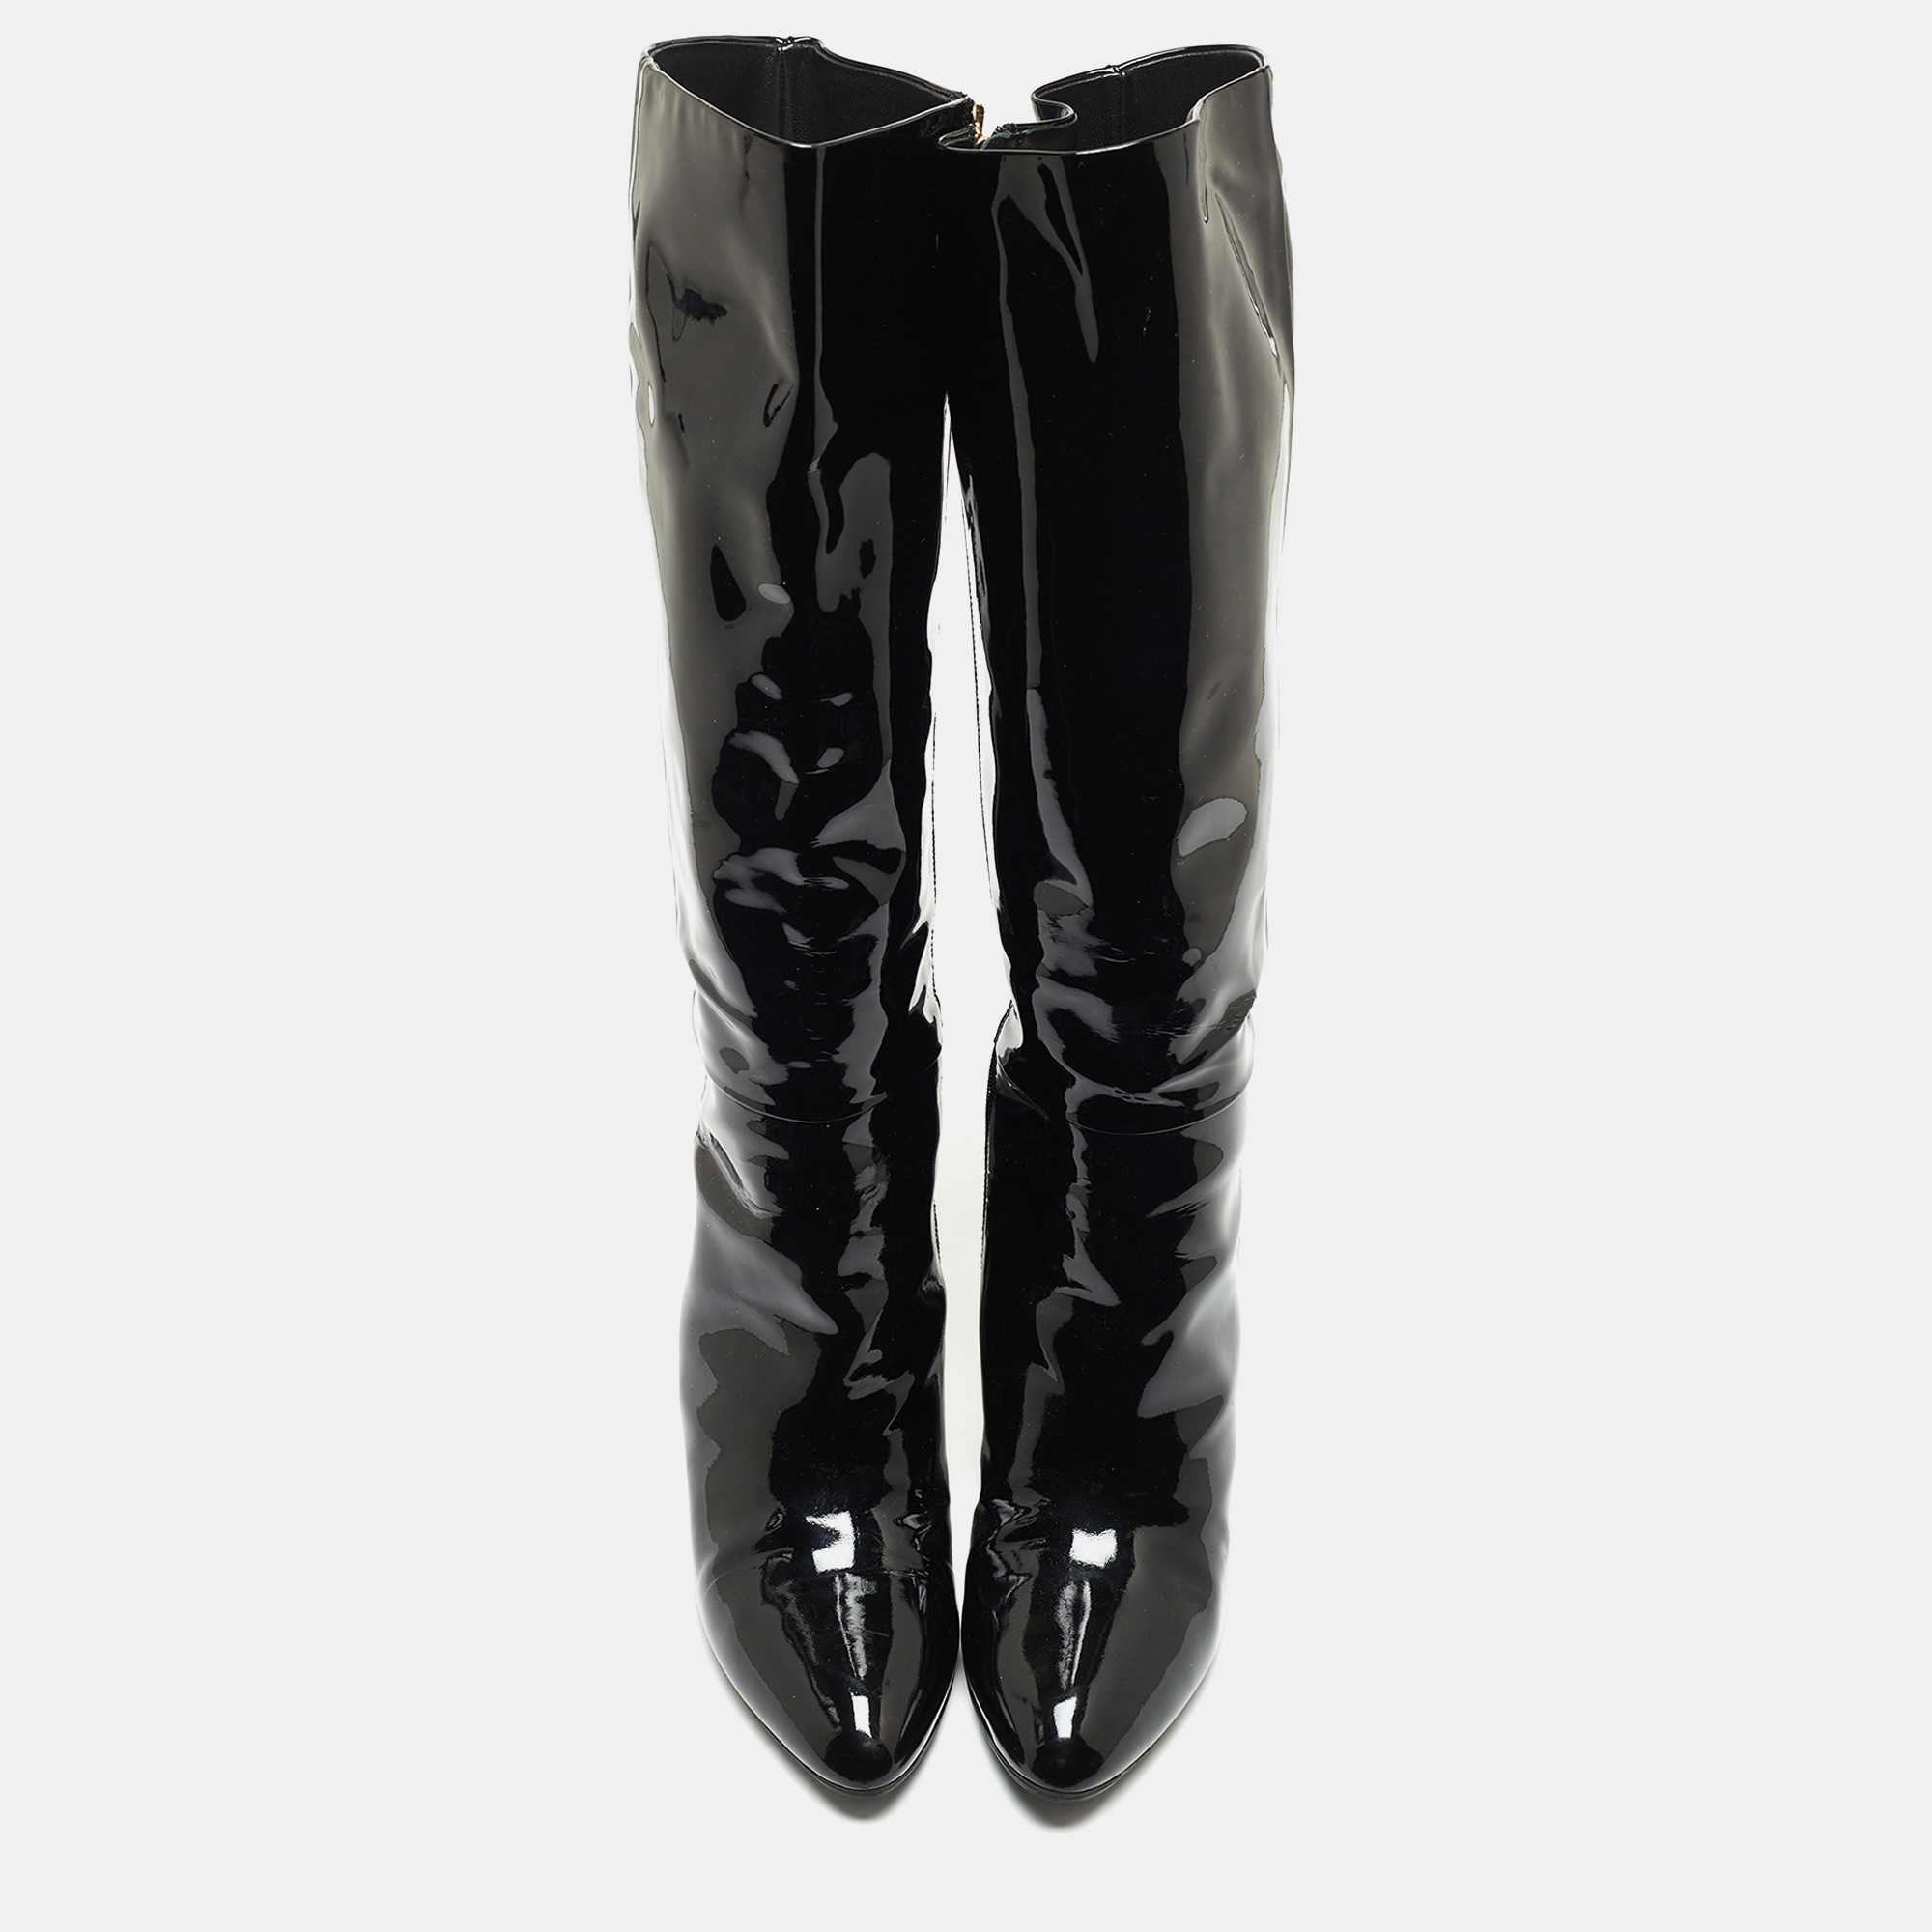 Gucci Black Patent Knee Length Boots Size 41